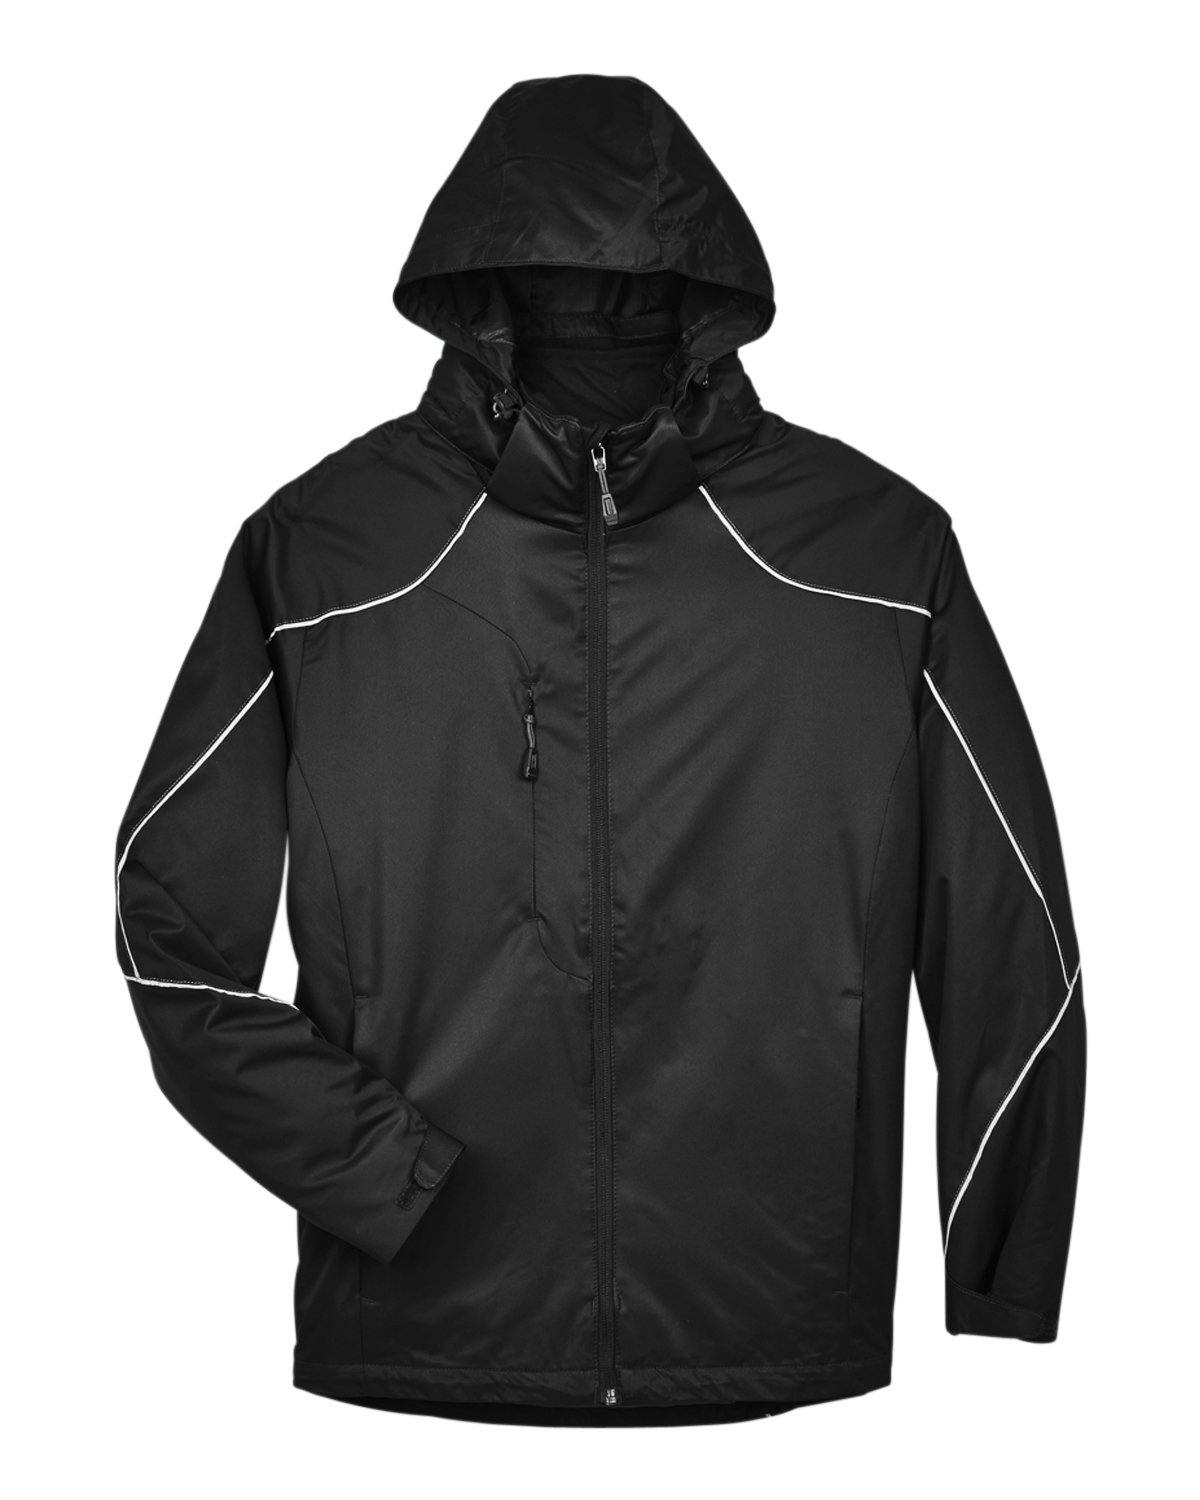 Image for Men's Angle 3-in-1 Jacket with Bonded Fleece Liner